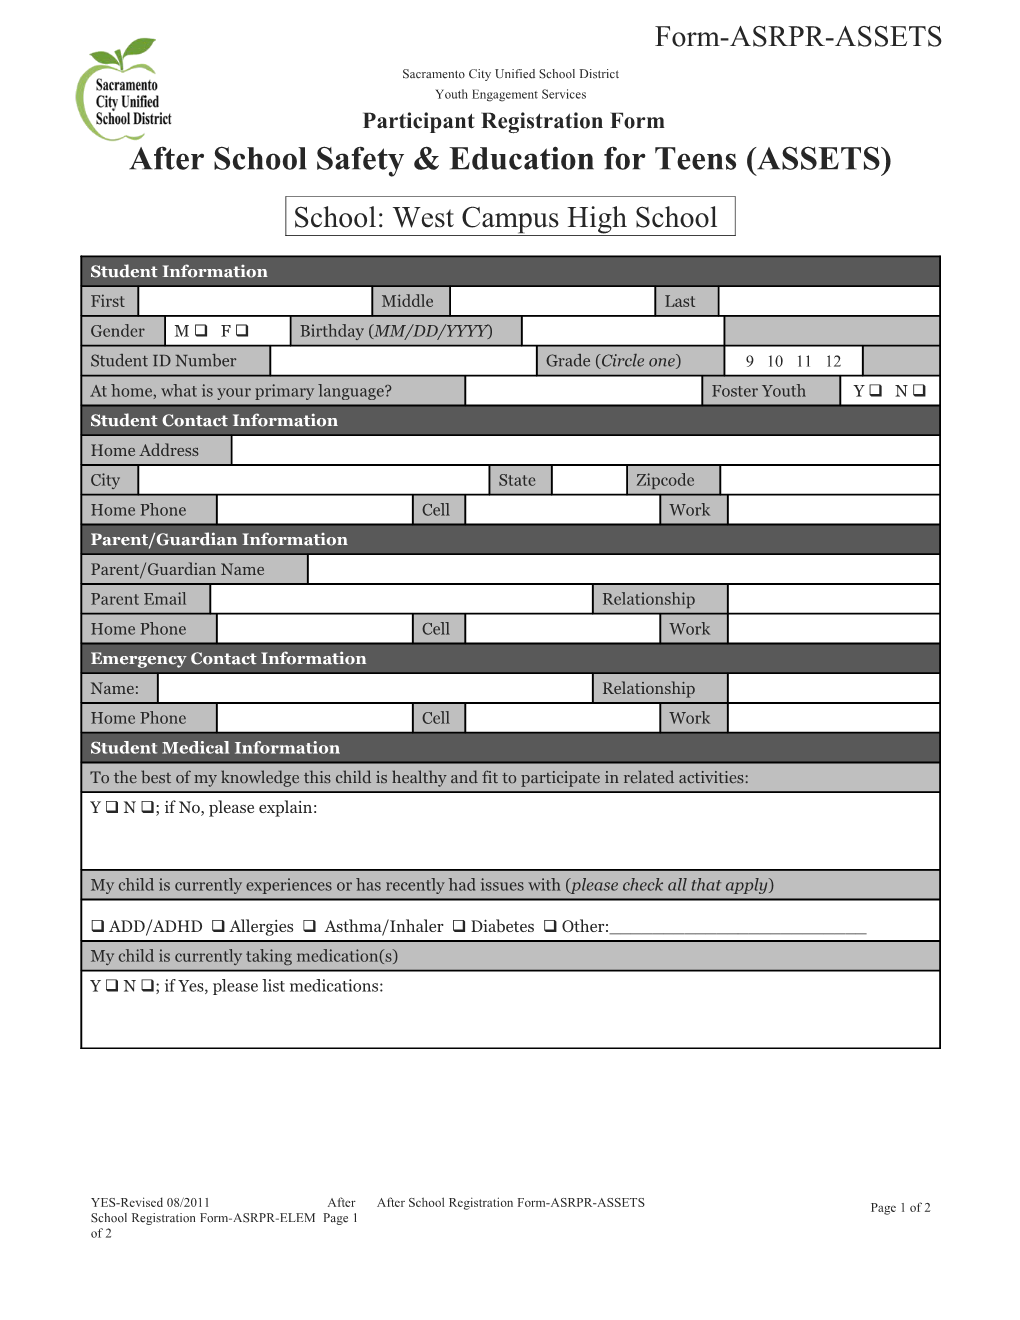 After School Safety & Education for Teens (ASSETS)